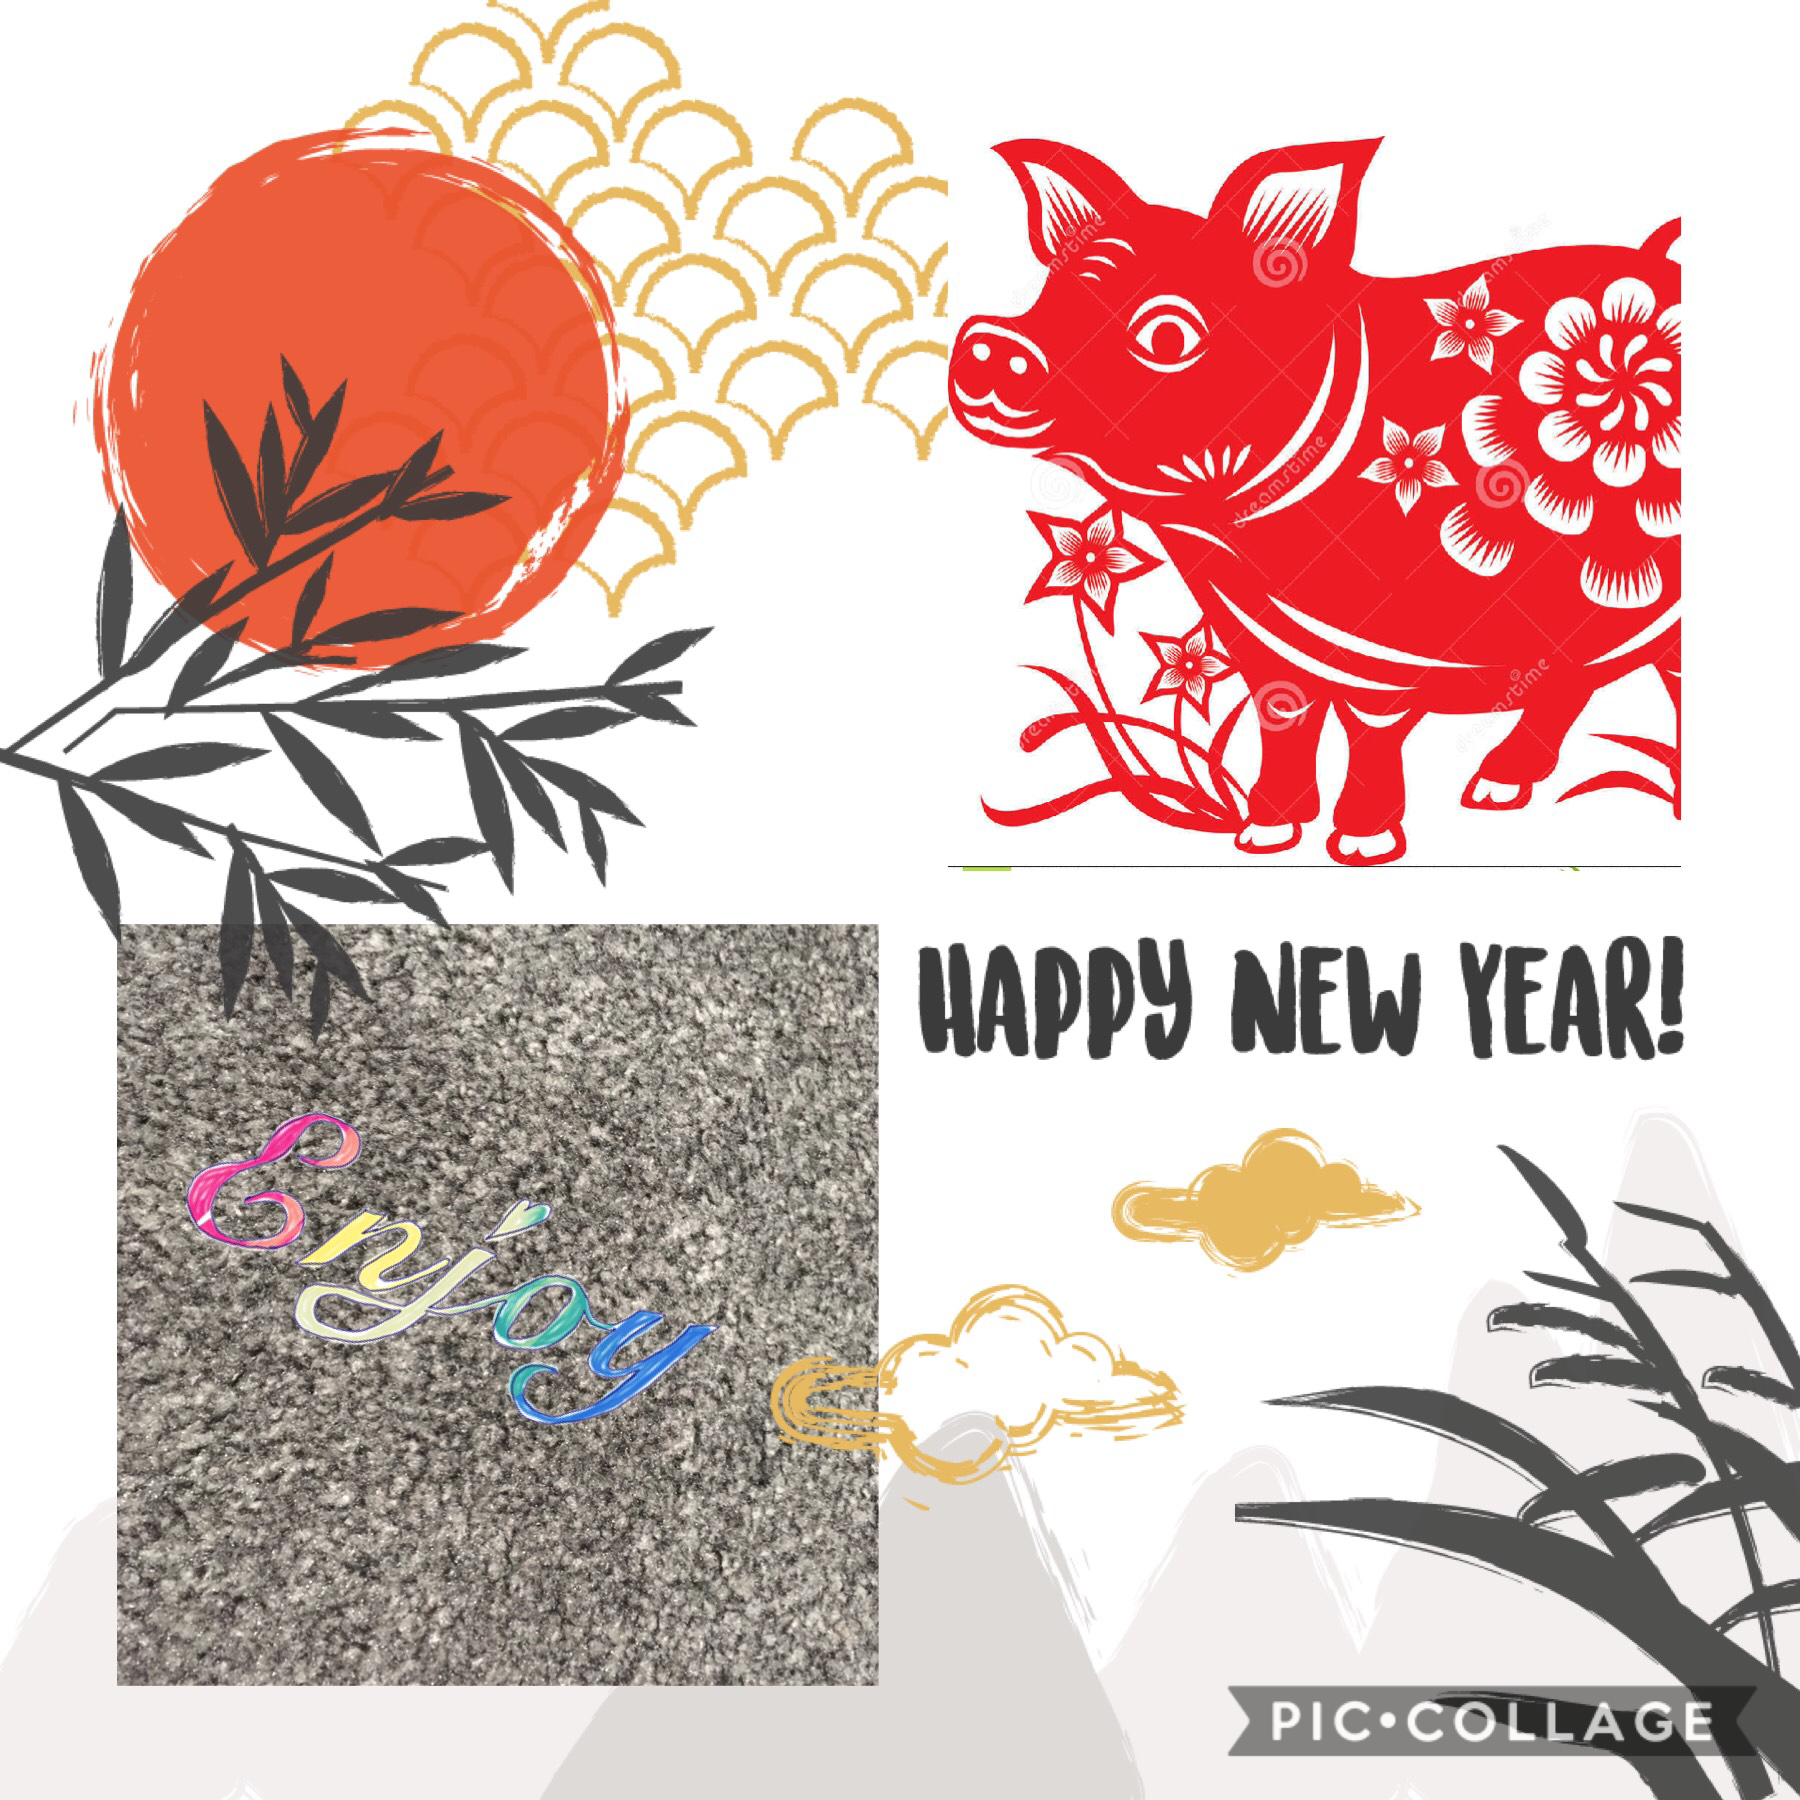 Happy Chinese New Year!!!!
...tap...